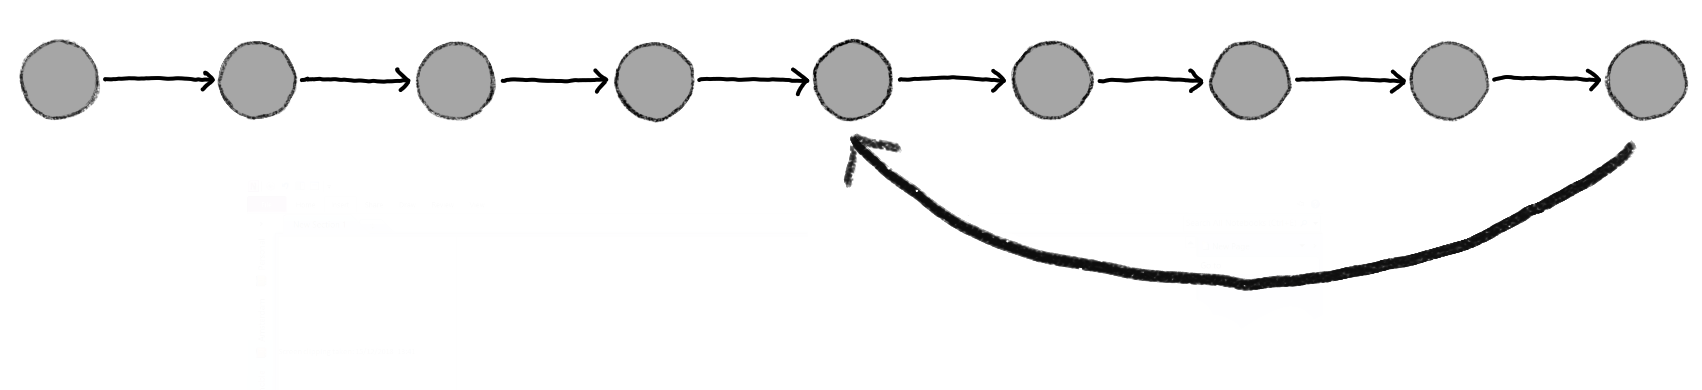 Version history within a single branch.